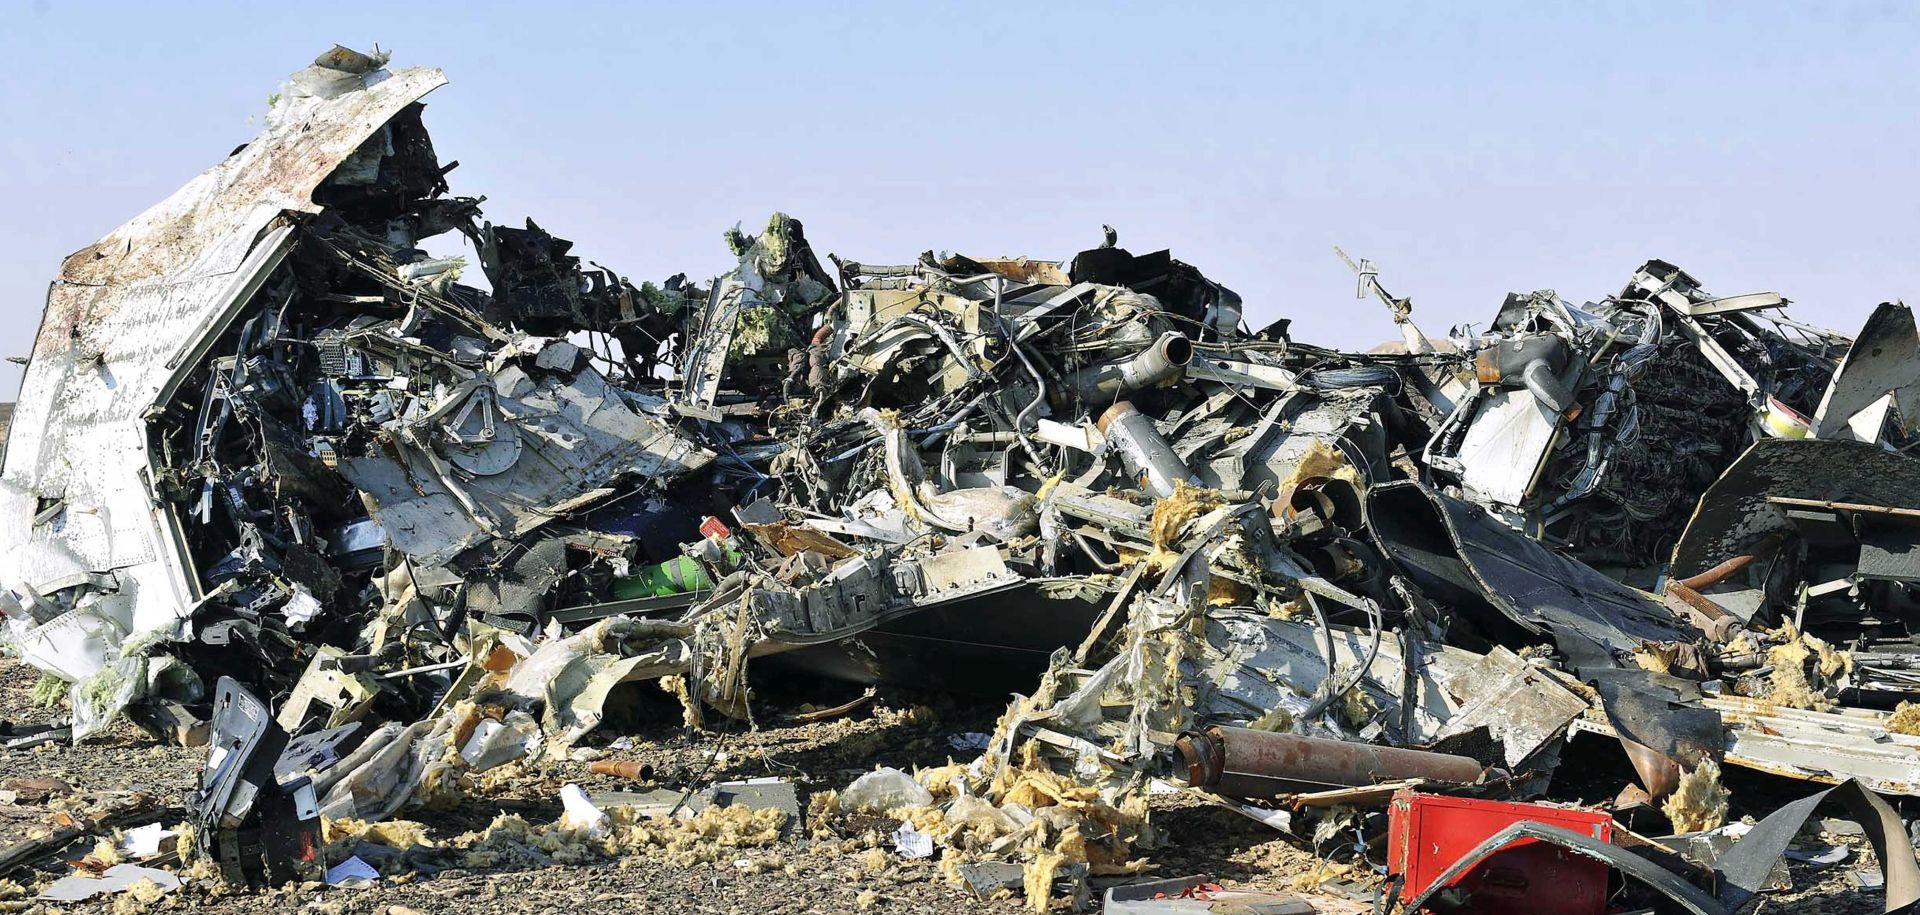 epa05005036 Debris from crashed Russian jet lies strewn across the sand at the site of the crash, Sinai, Egypt, 31 October 2015. According to reports the Egyptian Government has dispatched more than 45 ambulances to the crash site of the Kogalymavia Metrojet Russian passenger jet, which disappeared from raider after requesting an emergency landing early 31 October, crashing in the mountainous al-Hasanah area of central Sinai. The black box has been recovered at the site.  EPA/STR EGYPT OUT